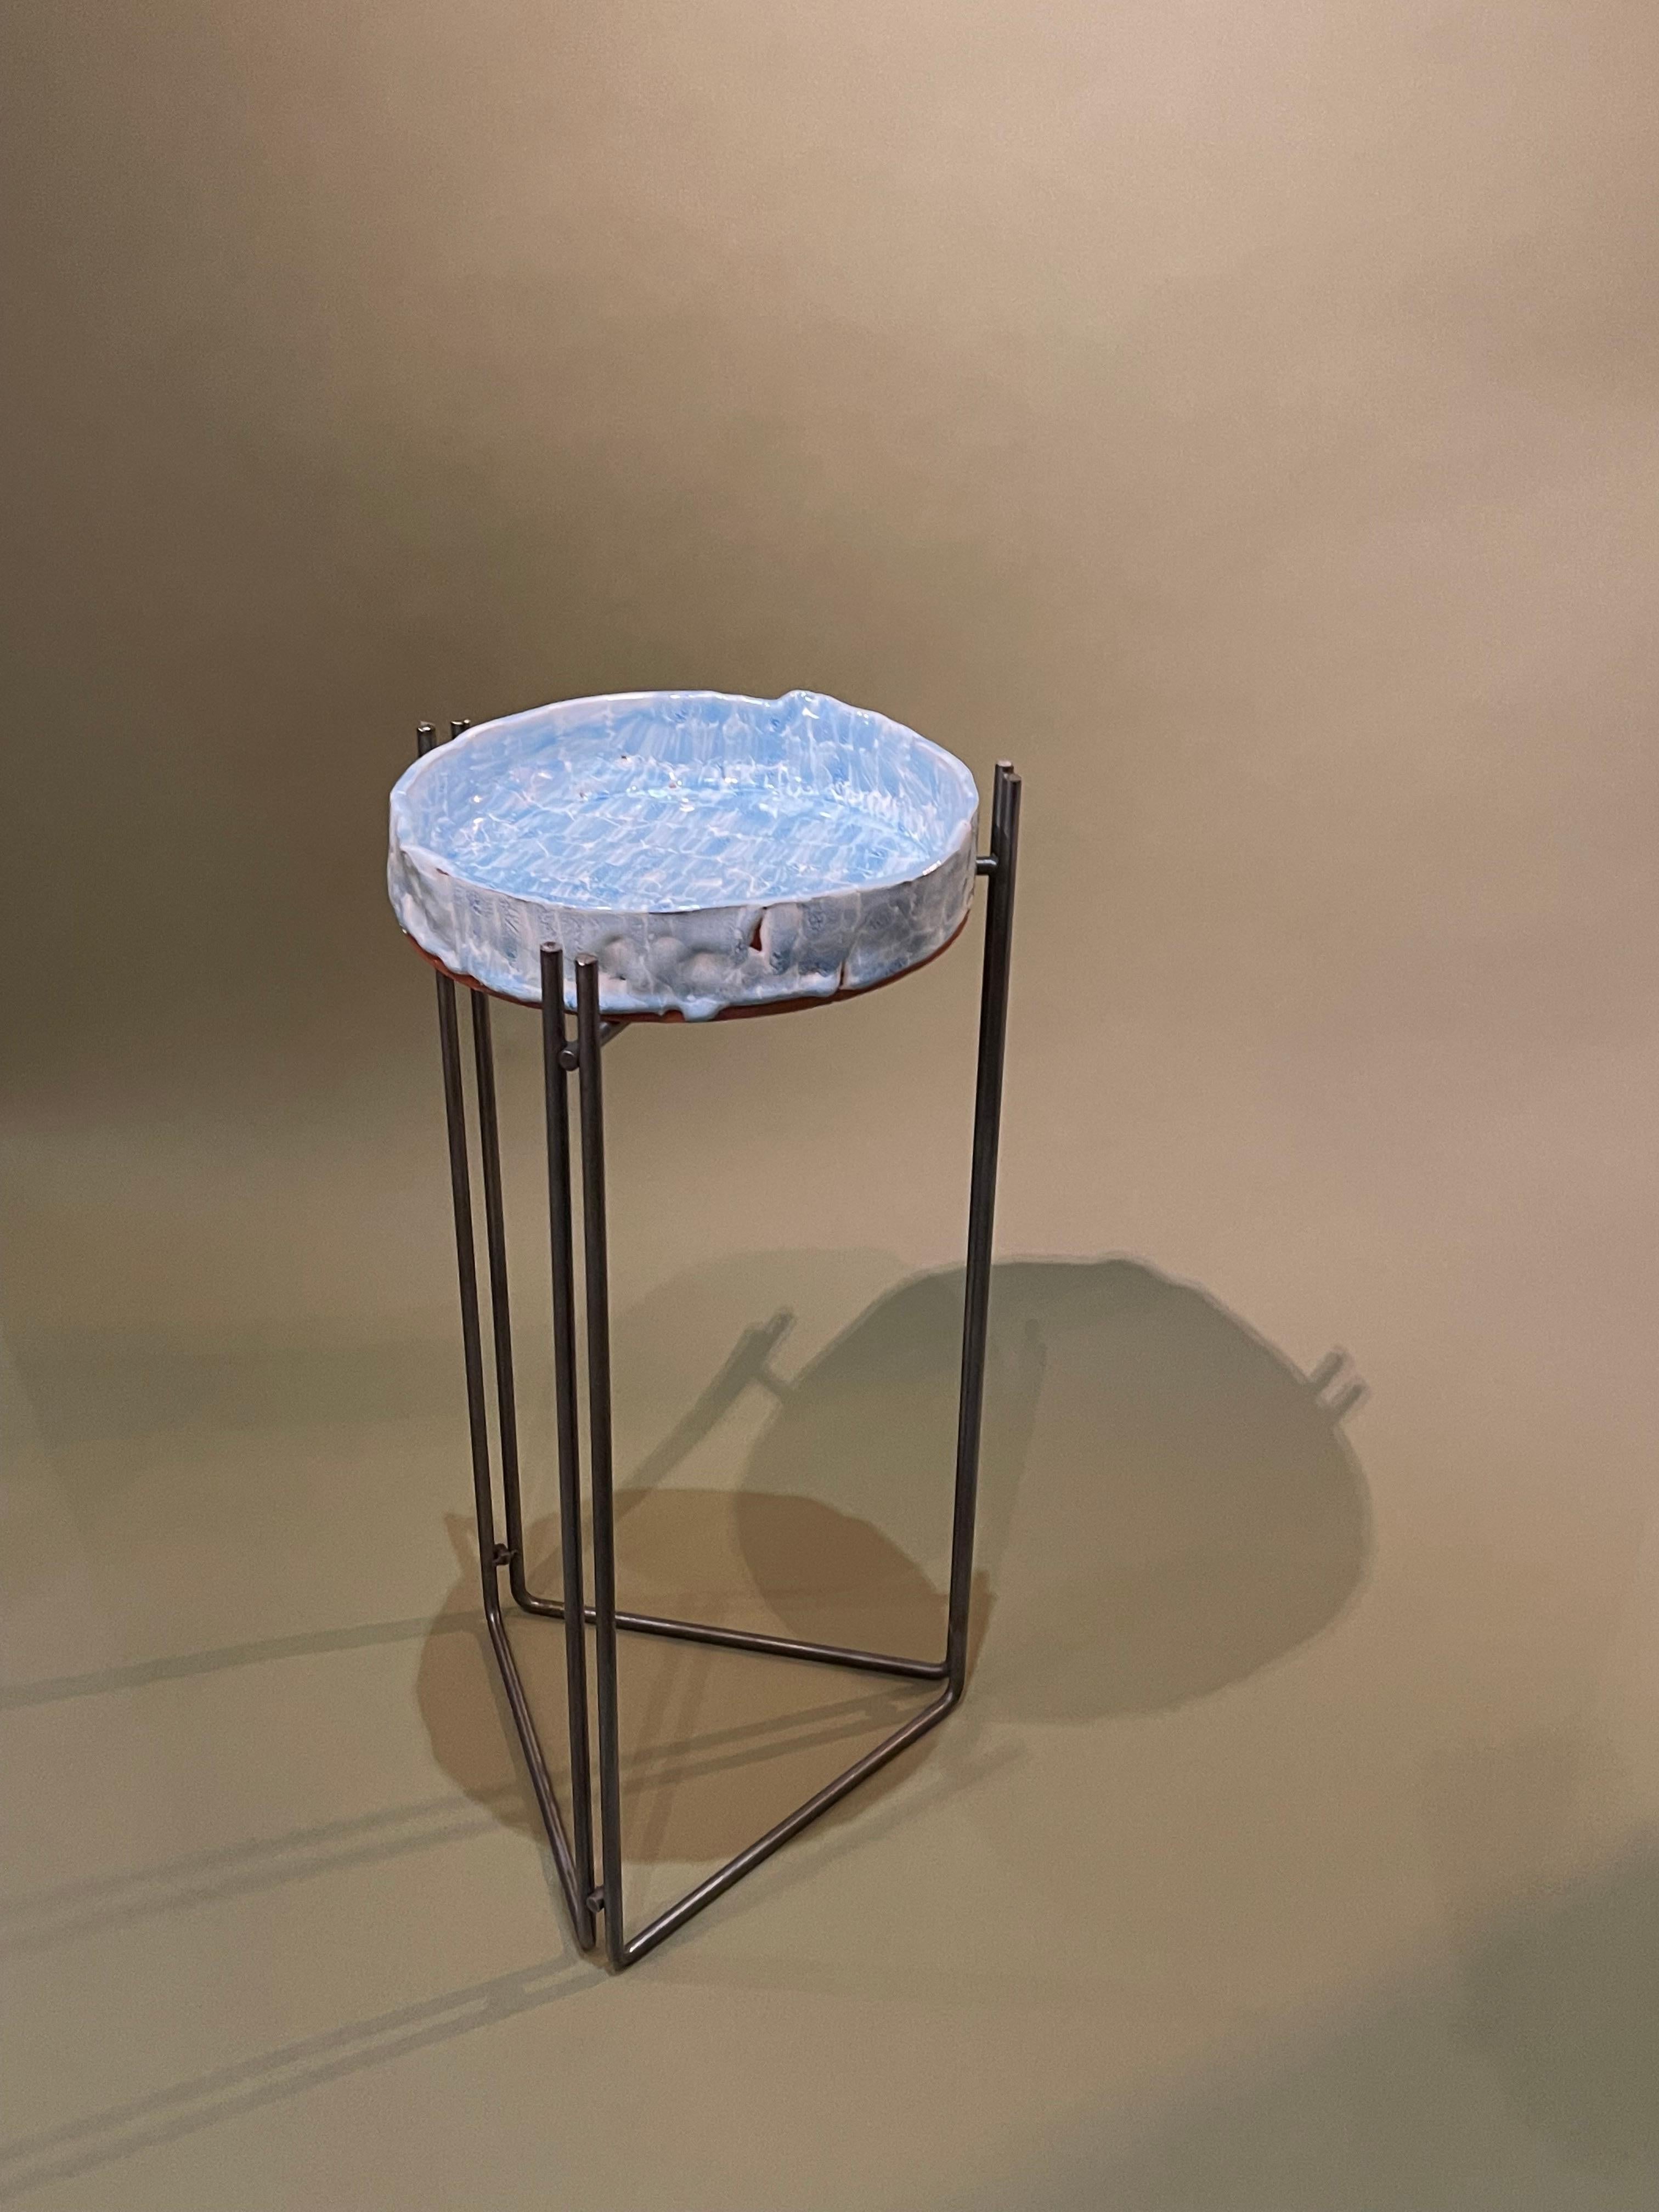 Post-Modern Table Majolica Ceramic Top & Stainless Steel by Hannelore Freer and Filipe Ramos